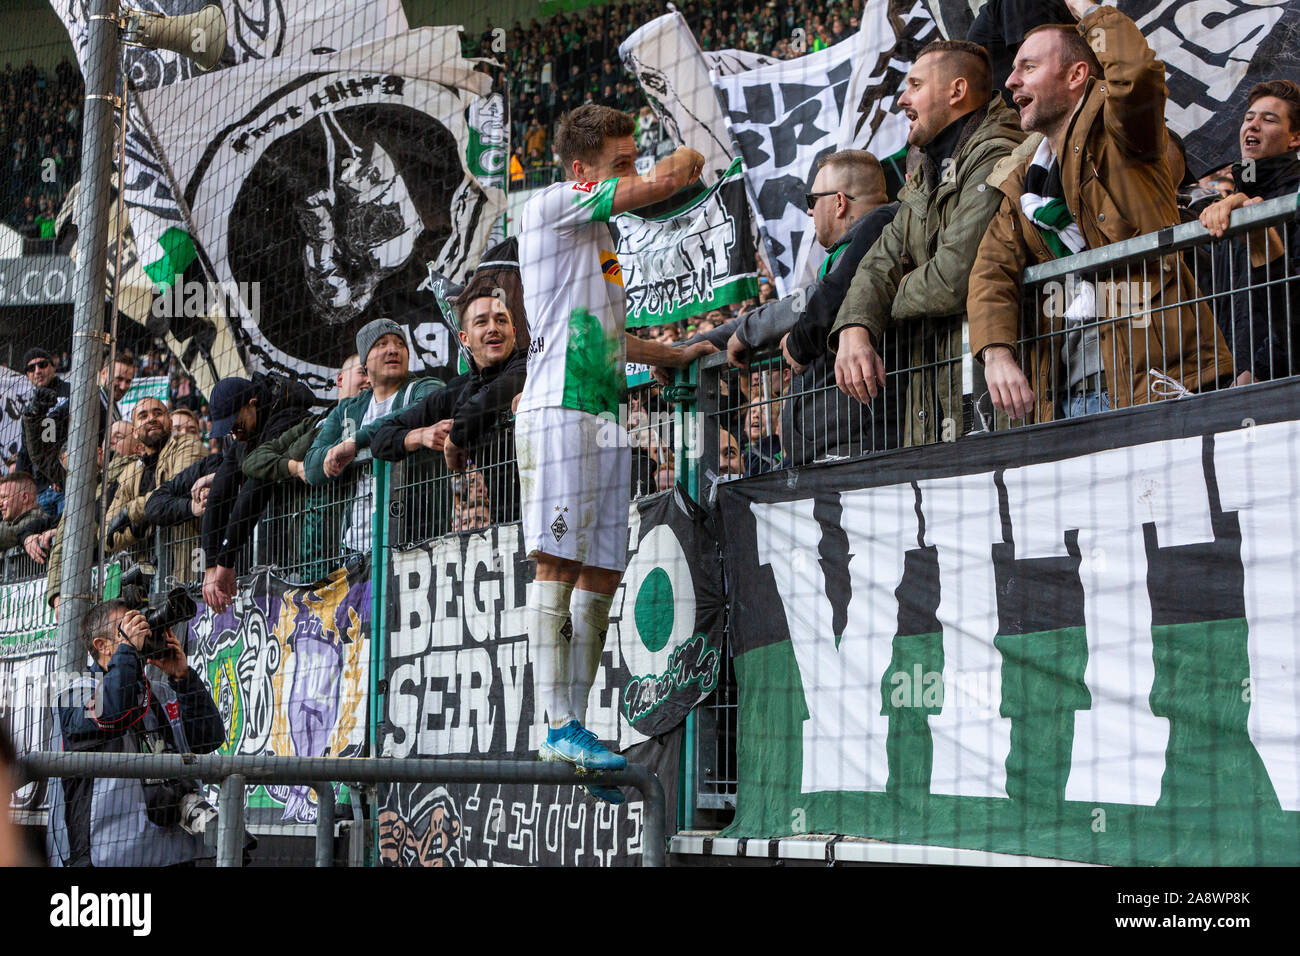 sports, football, Bundesliga, 2019/2020, Borussia Moenchengladbach vs. SV Werder Bremen 3-1, Stadium Borussia Park, Gladbach team celebrates the victory, fans give thanks to the double goal scorer Patrick Herrmann (MG), DFL REGULATIONS PROHIBIT ANY USE OF PHOTOGRAPHS AS IMAGE SEQUENCES AND/OR QUASI-VIDEO Stock Photo